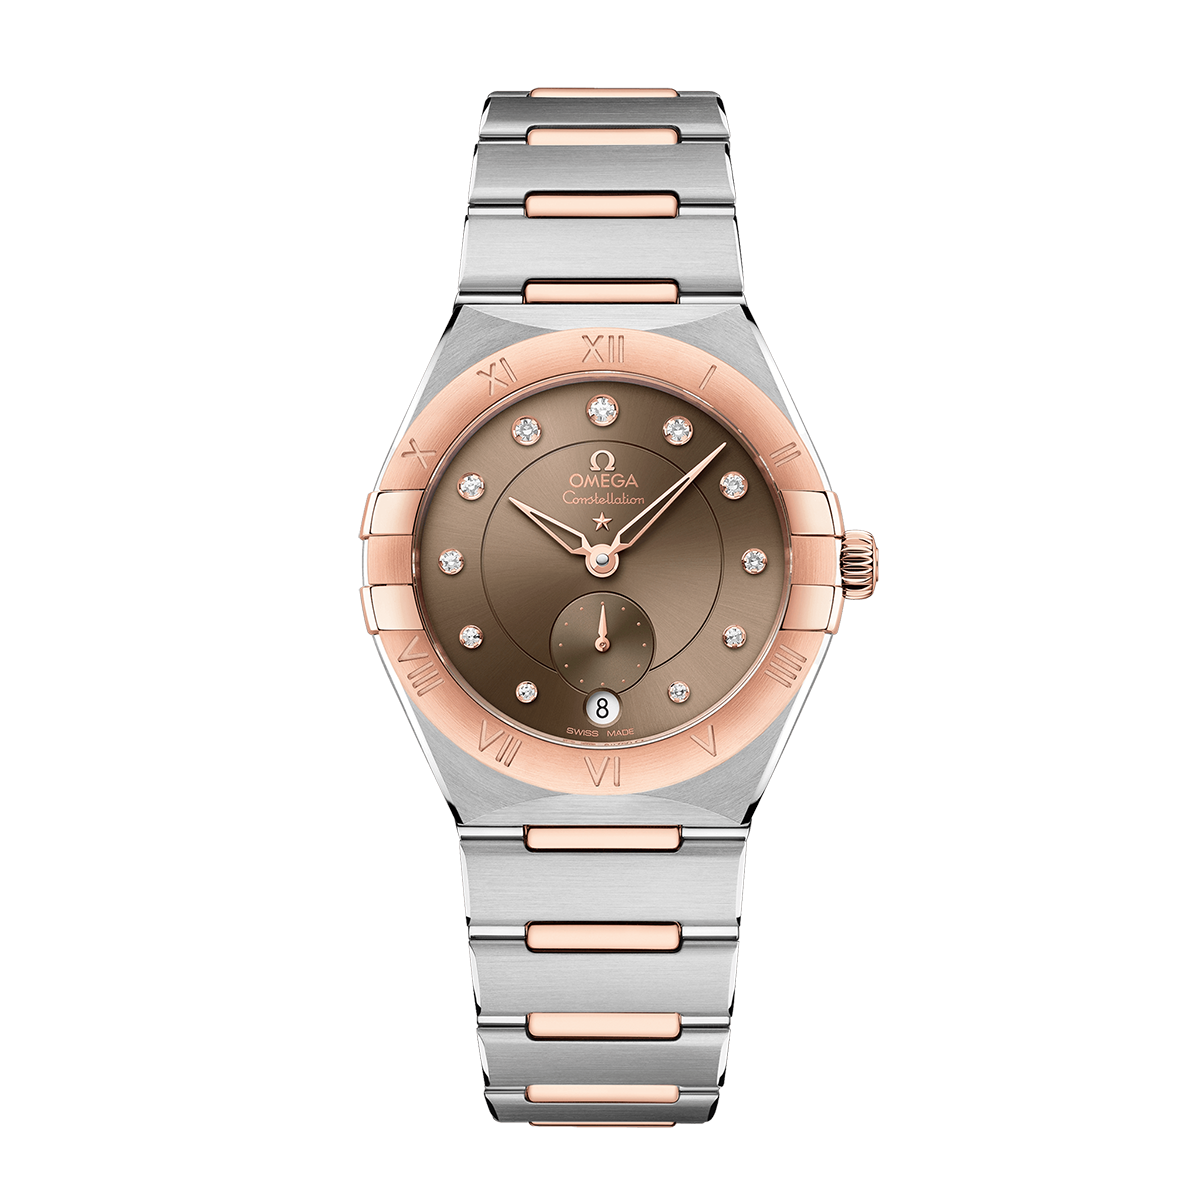 Omega-Constellation-Co-Axial-Master-Chronometer-Small-Seconds-34-mm-131.20.34.20.63.001-hos-Jarl-Sandin-1